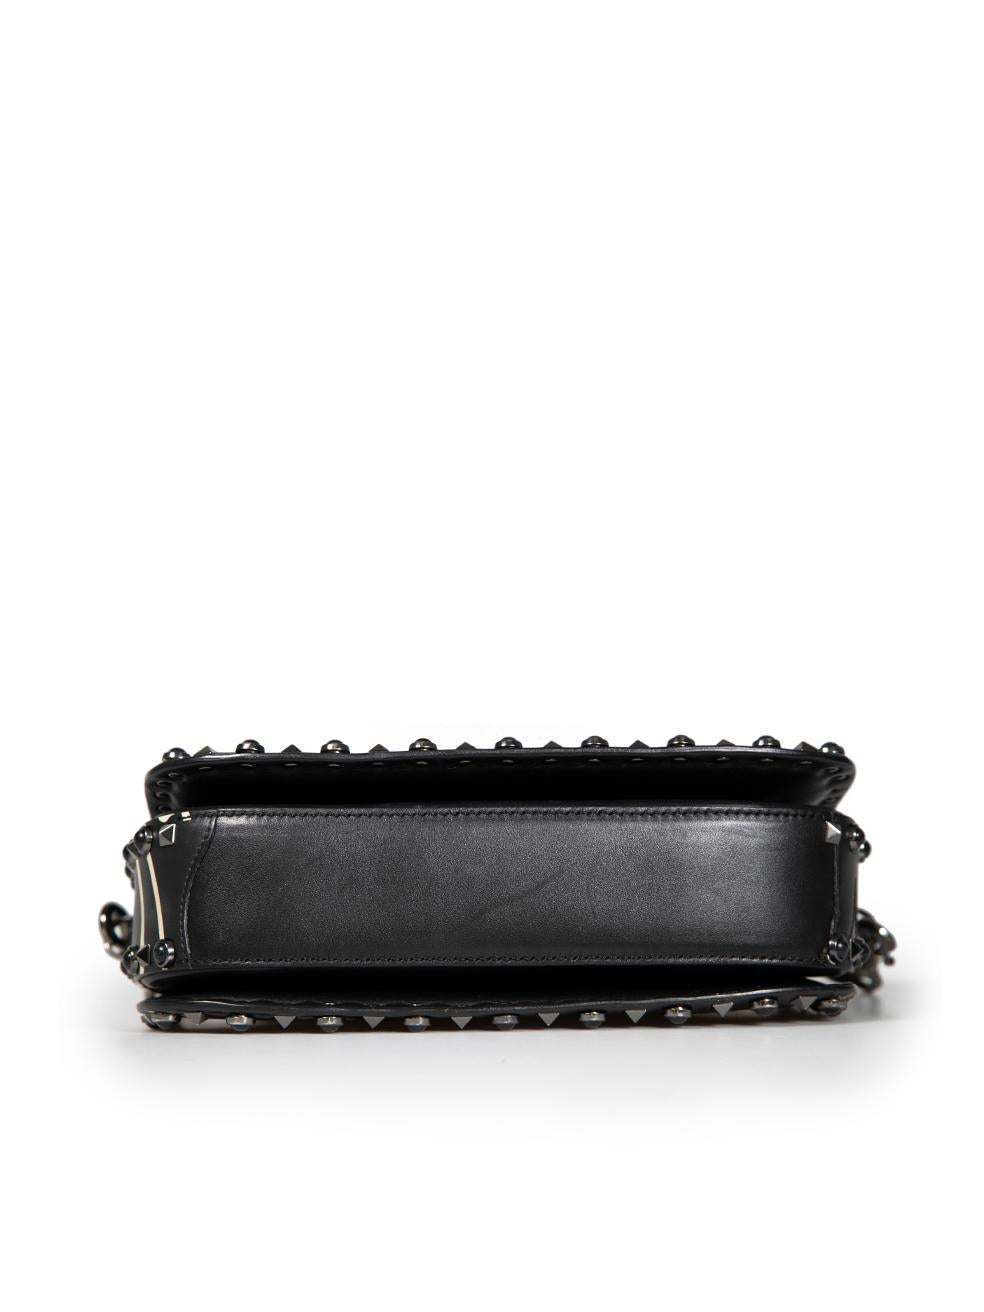 Women's Valentino Black Leather Panther Rolling Rockstud Bag